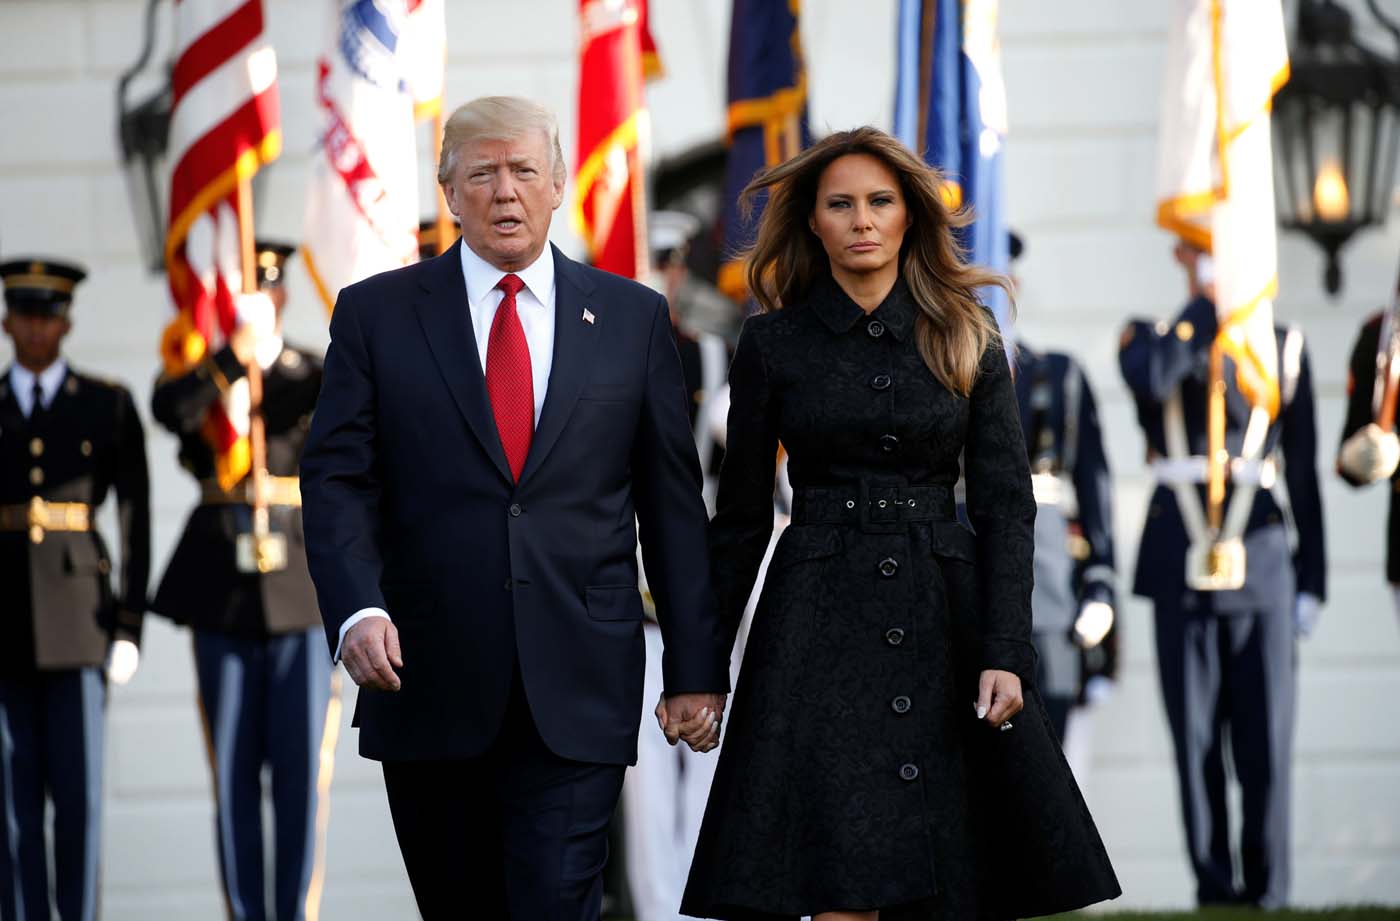 U.S. President Donald Trump and first lady Melania Trump arrive to observe a moment of silence in remembrance of those lost in the 9/11 attacks at the White House in Washington, U.S. September 11, 2017. REUTERS/Kevin Lamarque